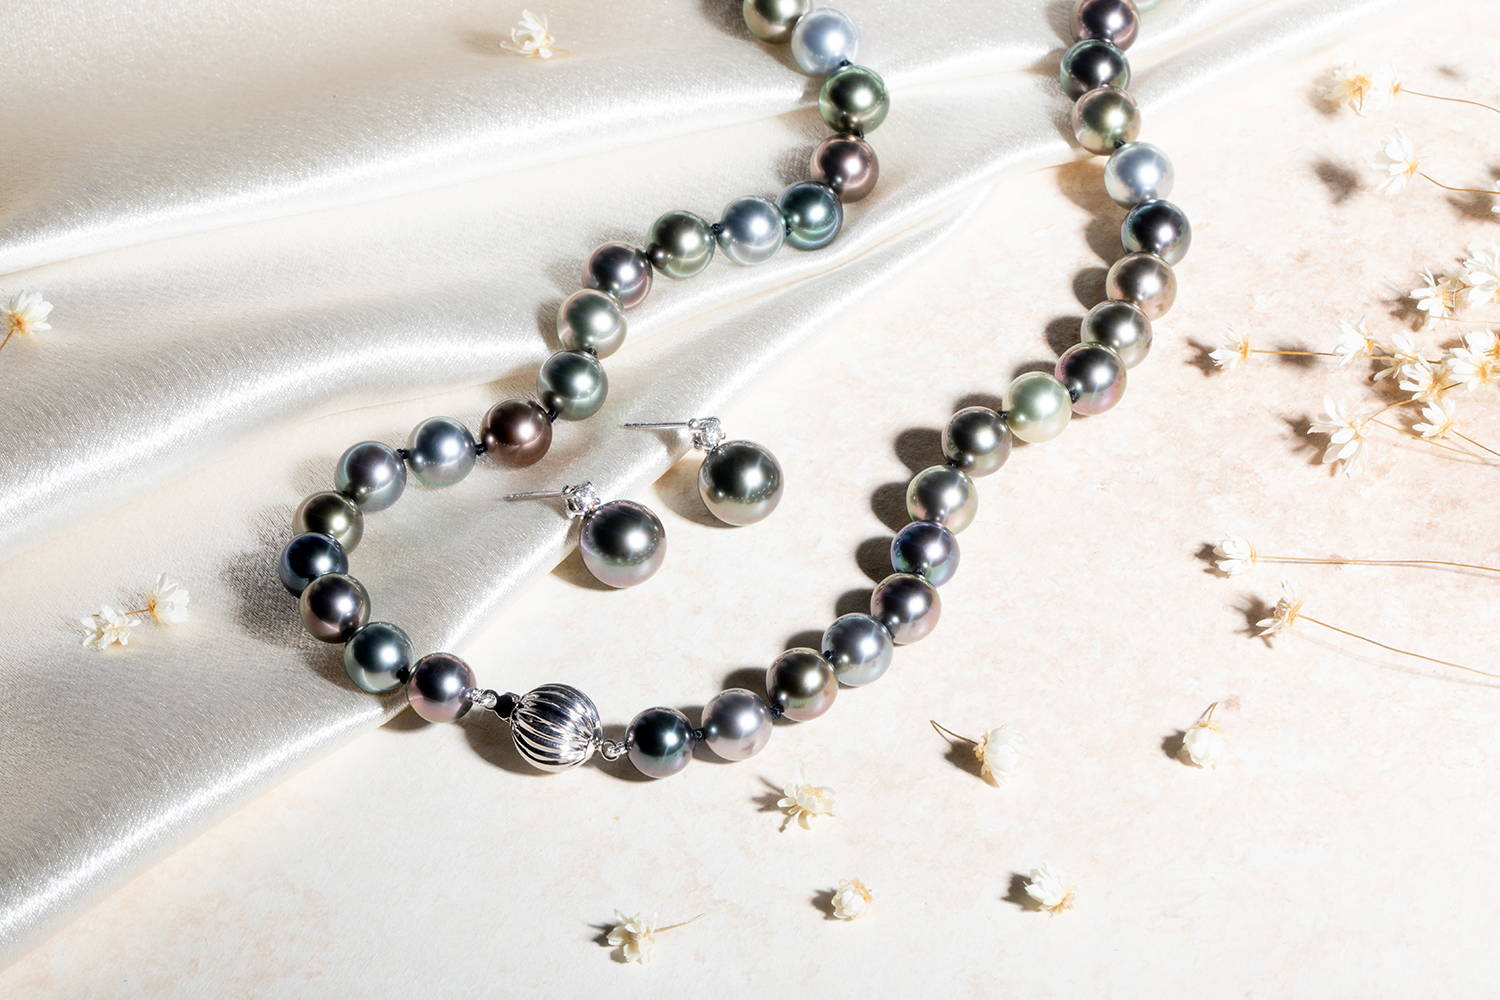 Multi color Tahitian Pearl Necklace with Earrings on Silk Cloth with Tiny White Flowers